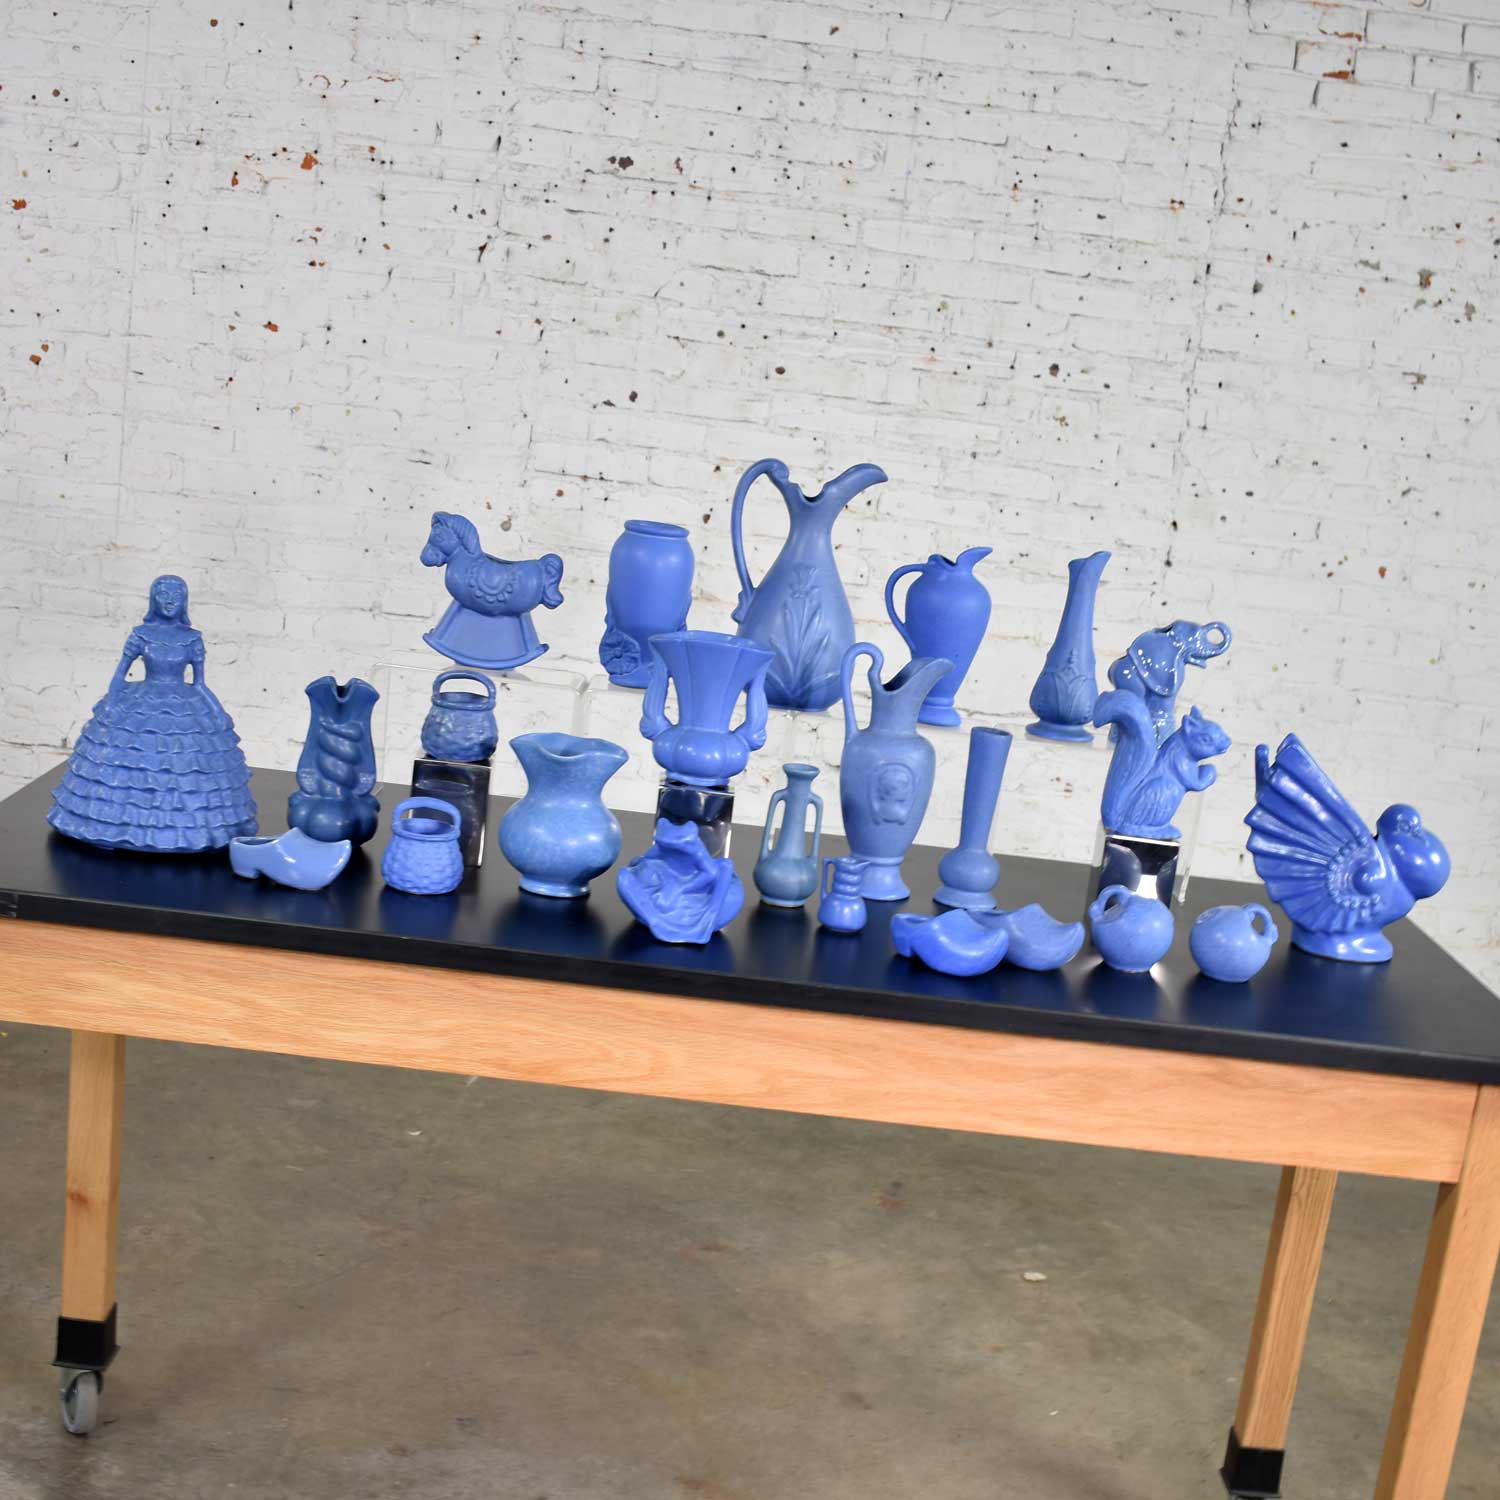 24 Piece Collection of Blue Niloak Mid Century Pottery